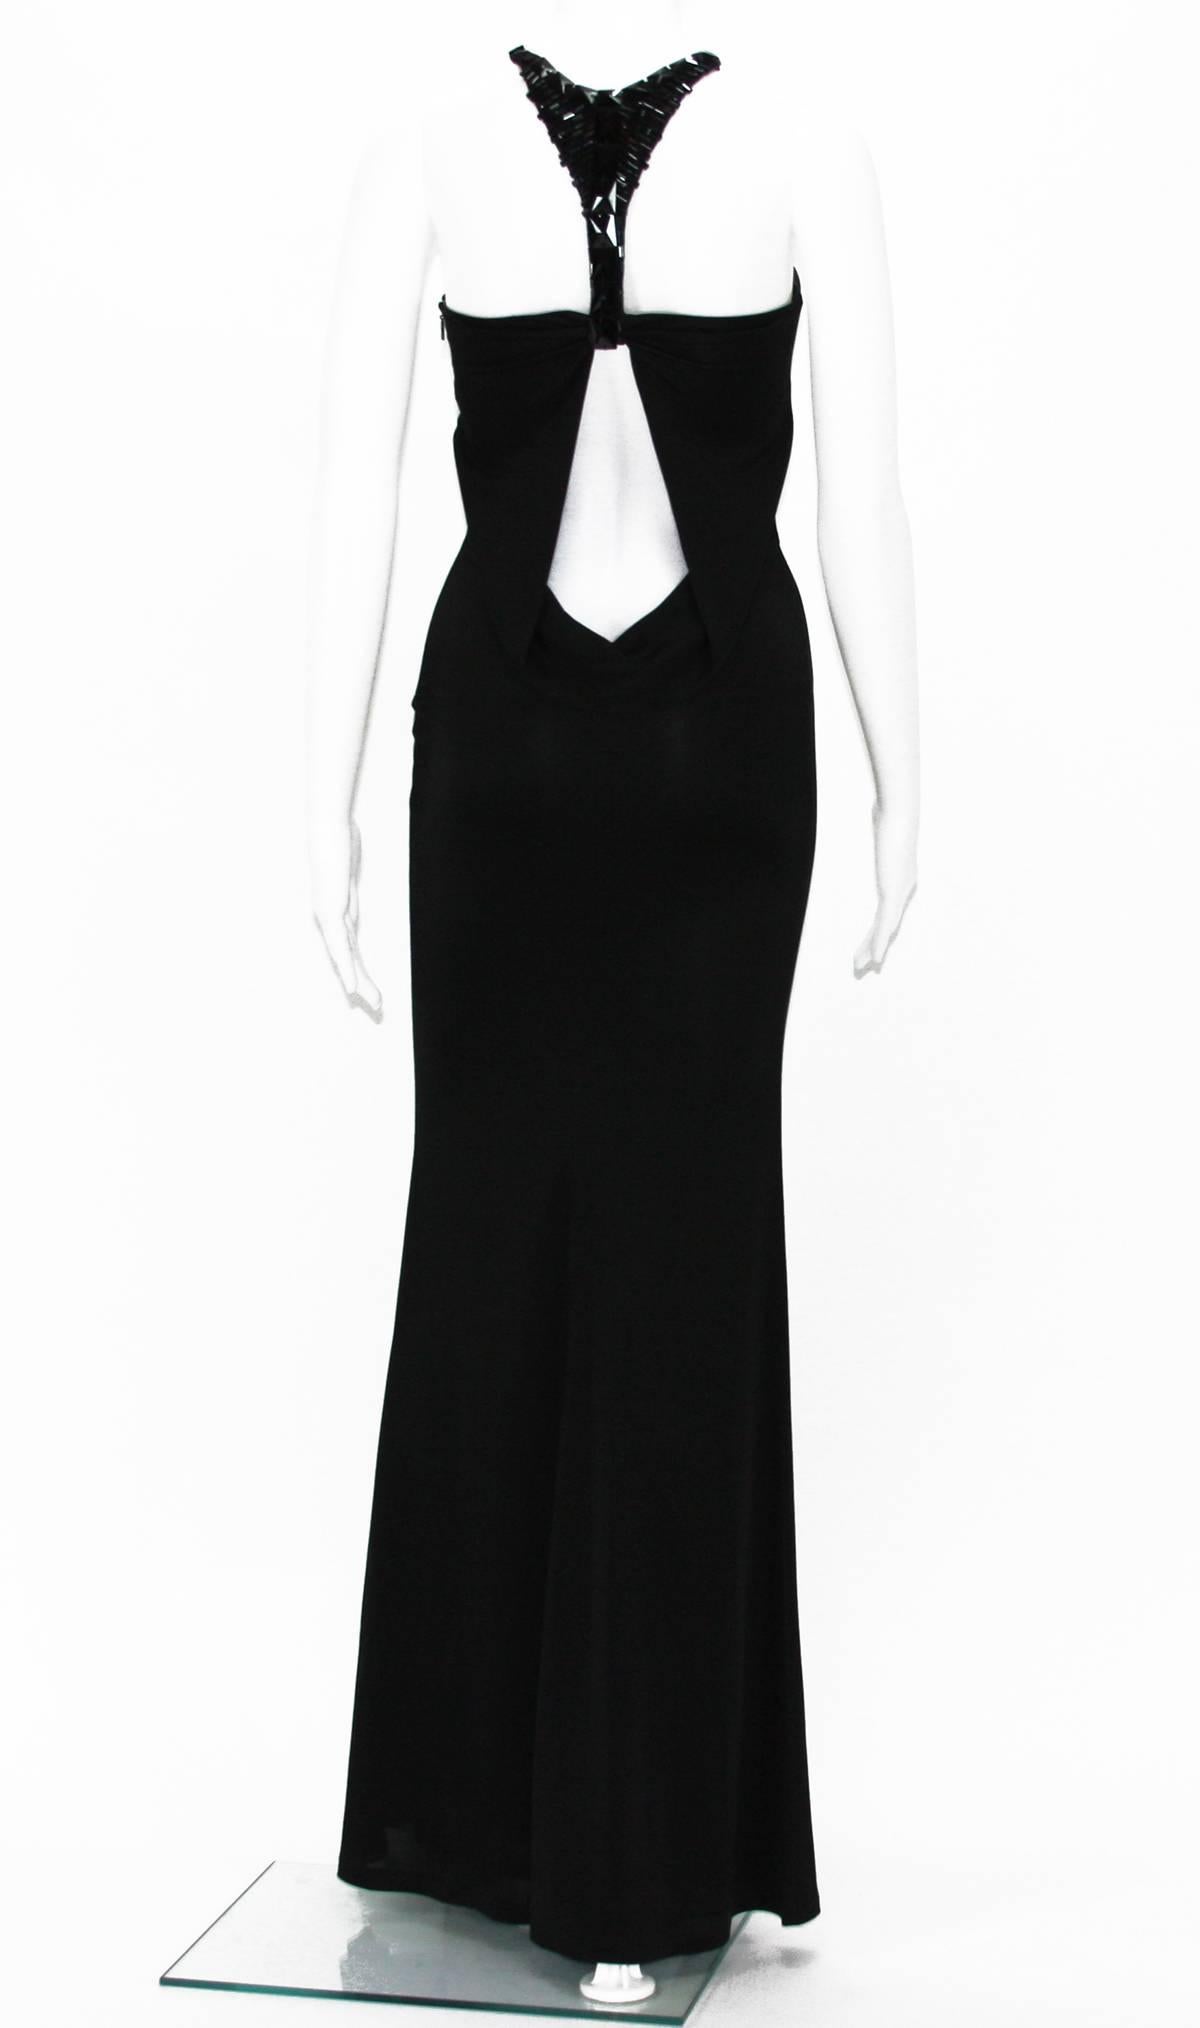 TOM FORD for GUCCI Black Beaded Jersey Dress Gown
TOM FORD'S Final Collection for GUCCI – F/W 2004
The White Same Dress was Worn by Robin Wright at the Cannes Film Festival in 2004
Italian Size - 38
Color – Black
Finished with black SWAROVSKI